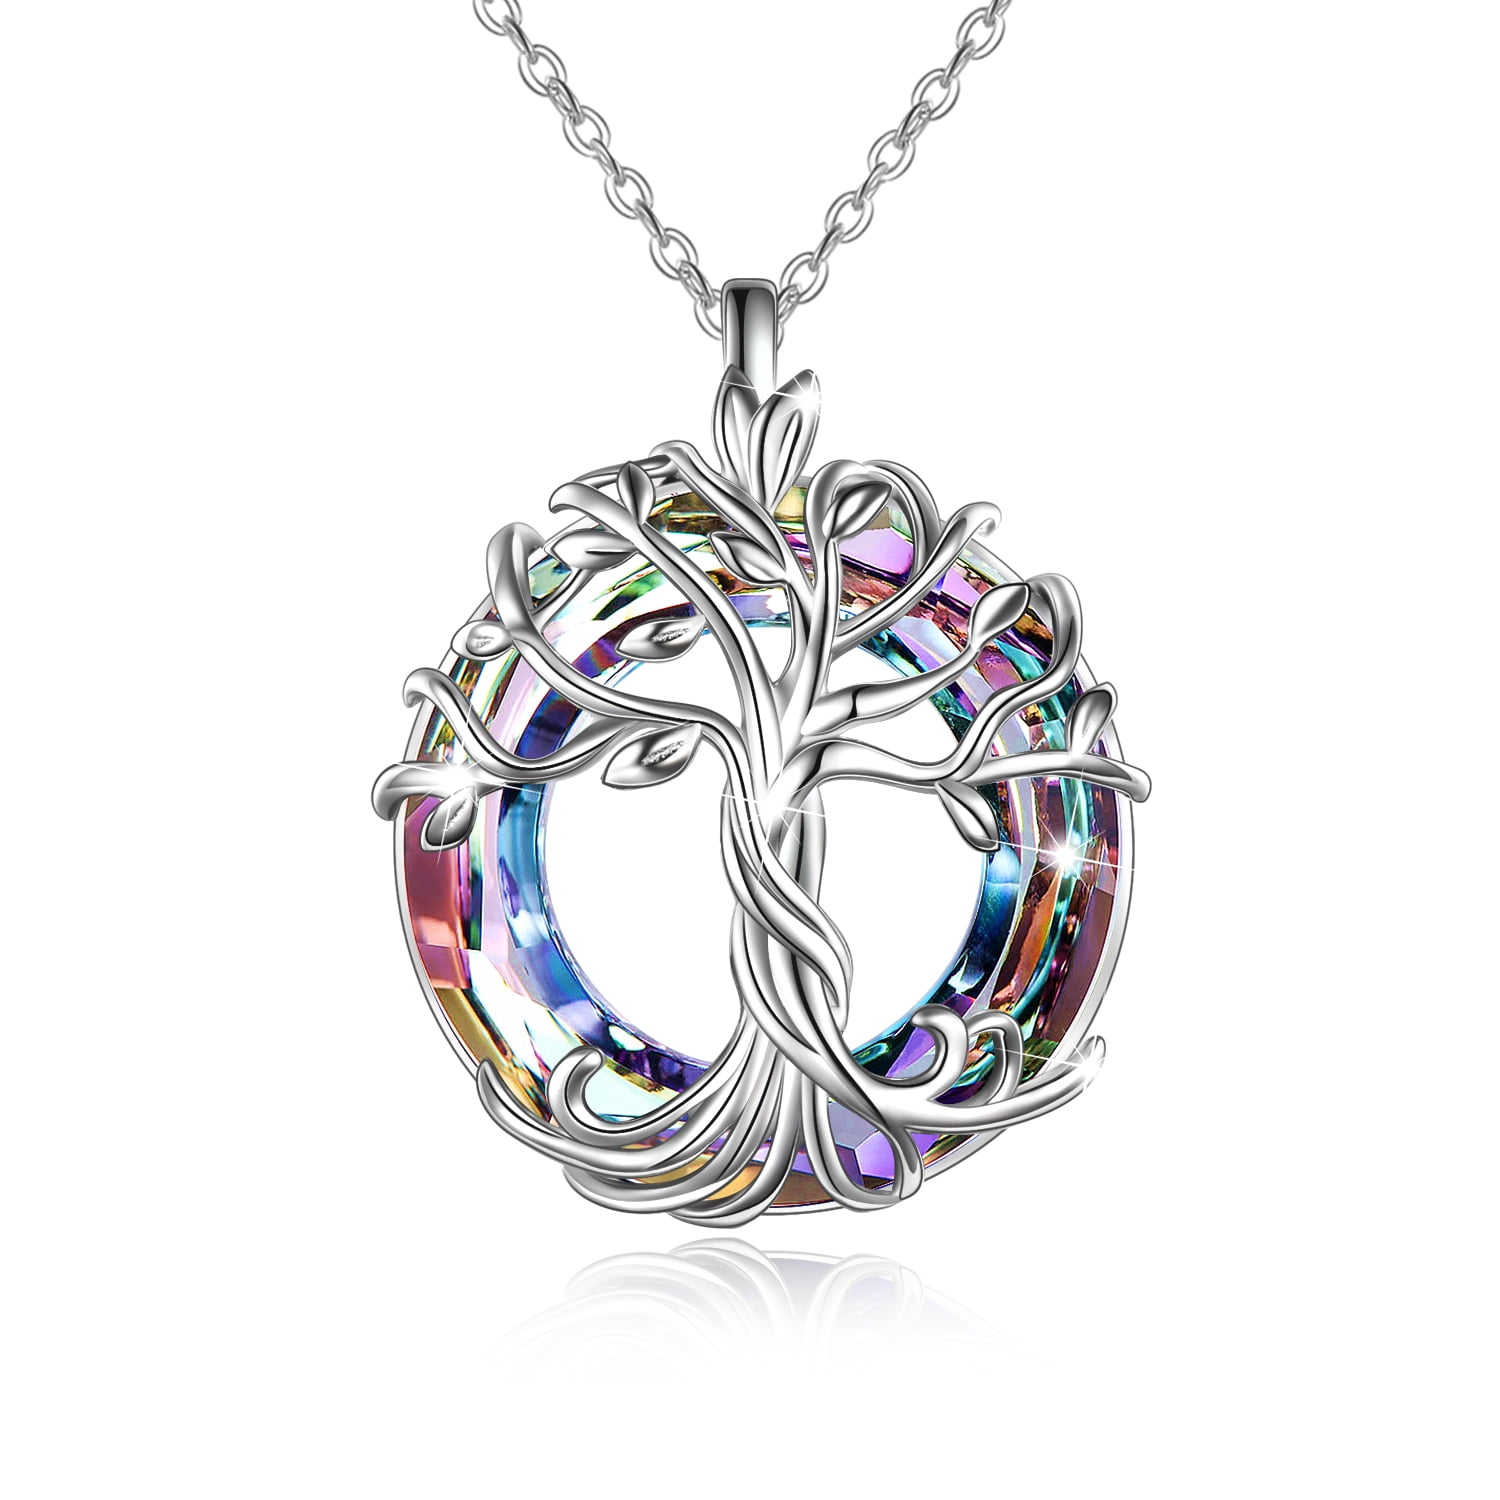 Birthday Gifts for Her, Family Tree of Life Pendant Necklace, Fashion